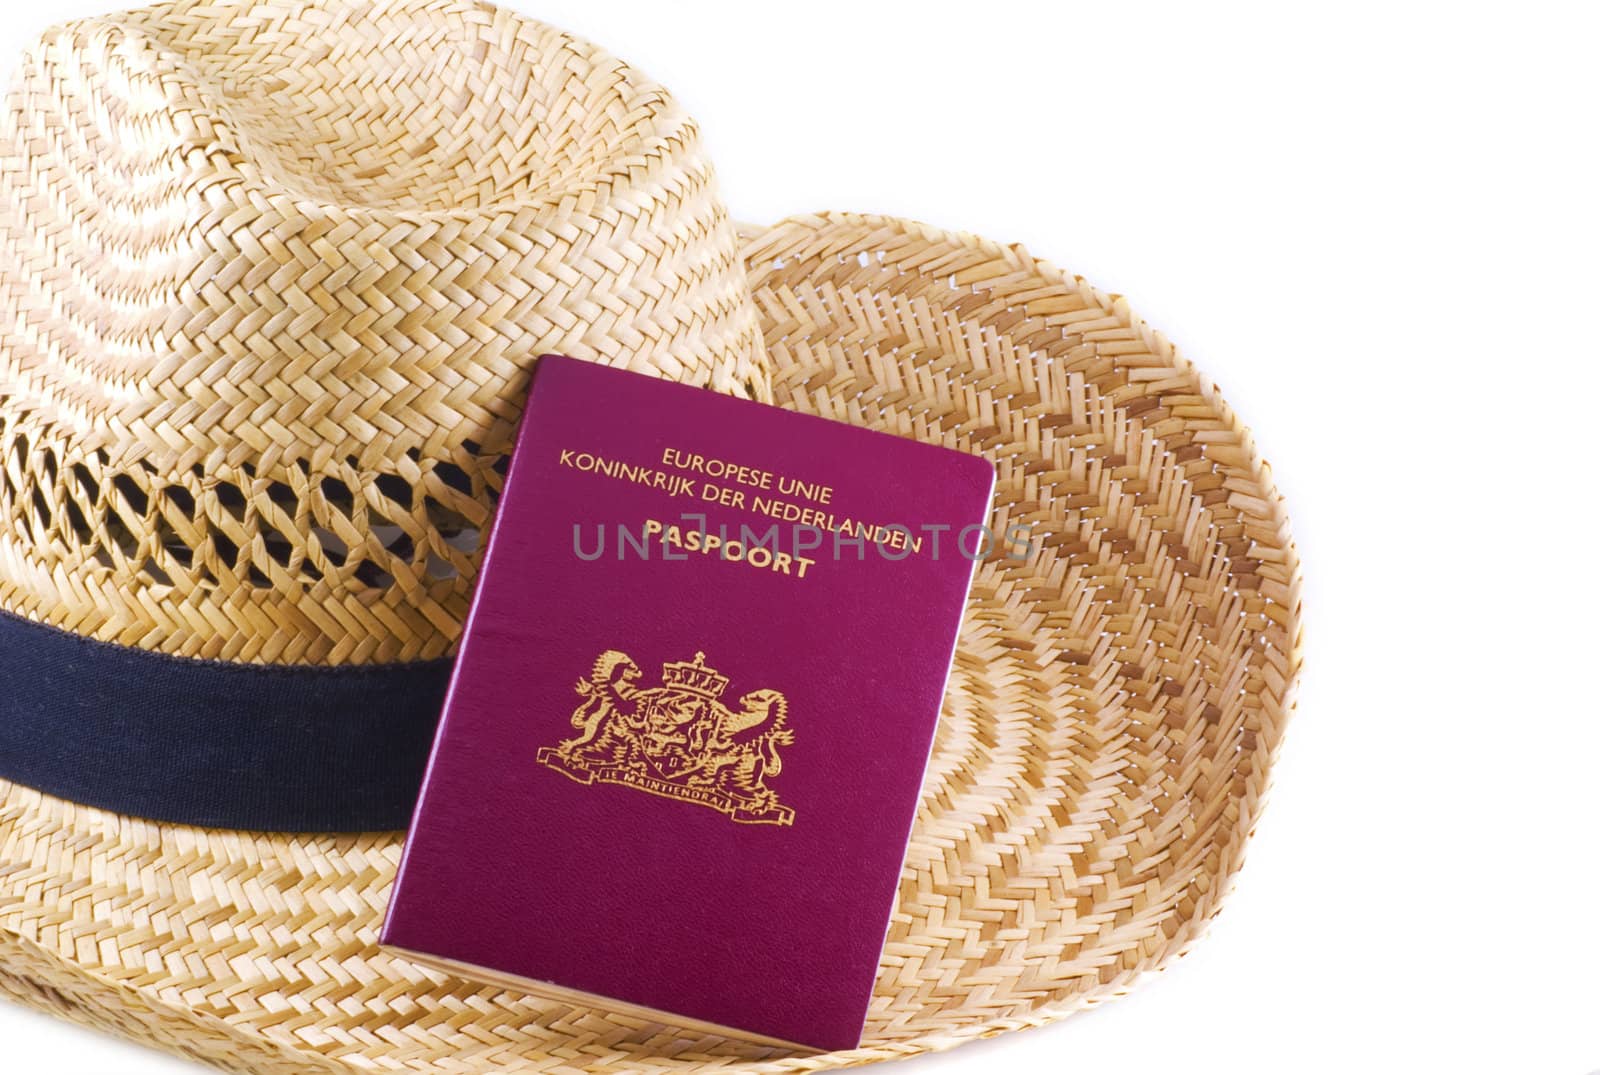 Straw hat with passport, isolated on a white background.